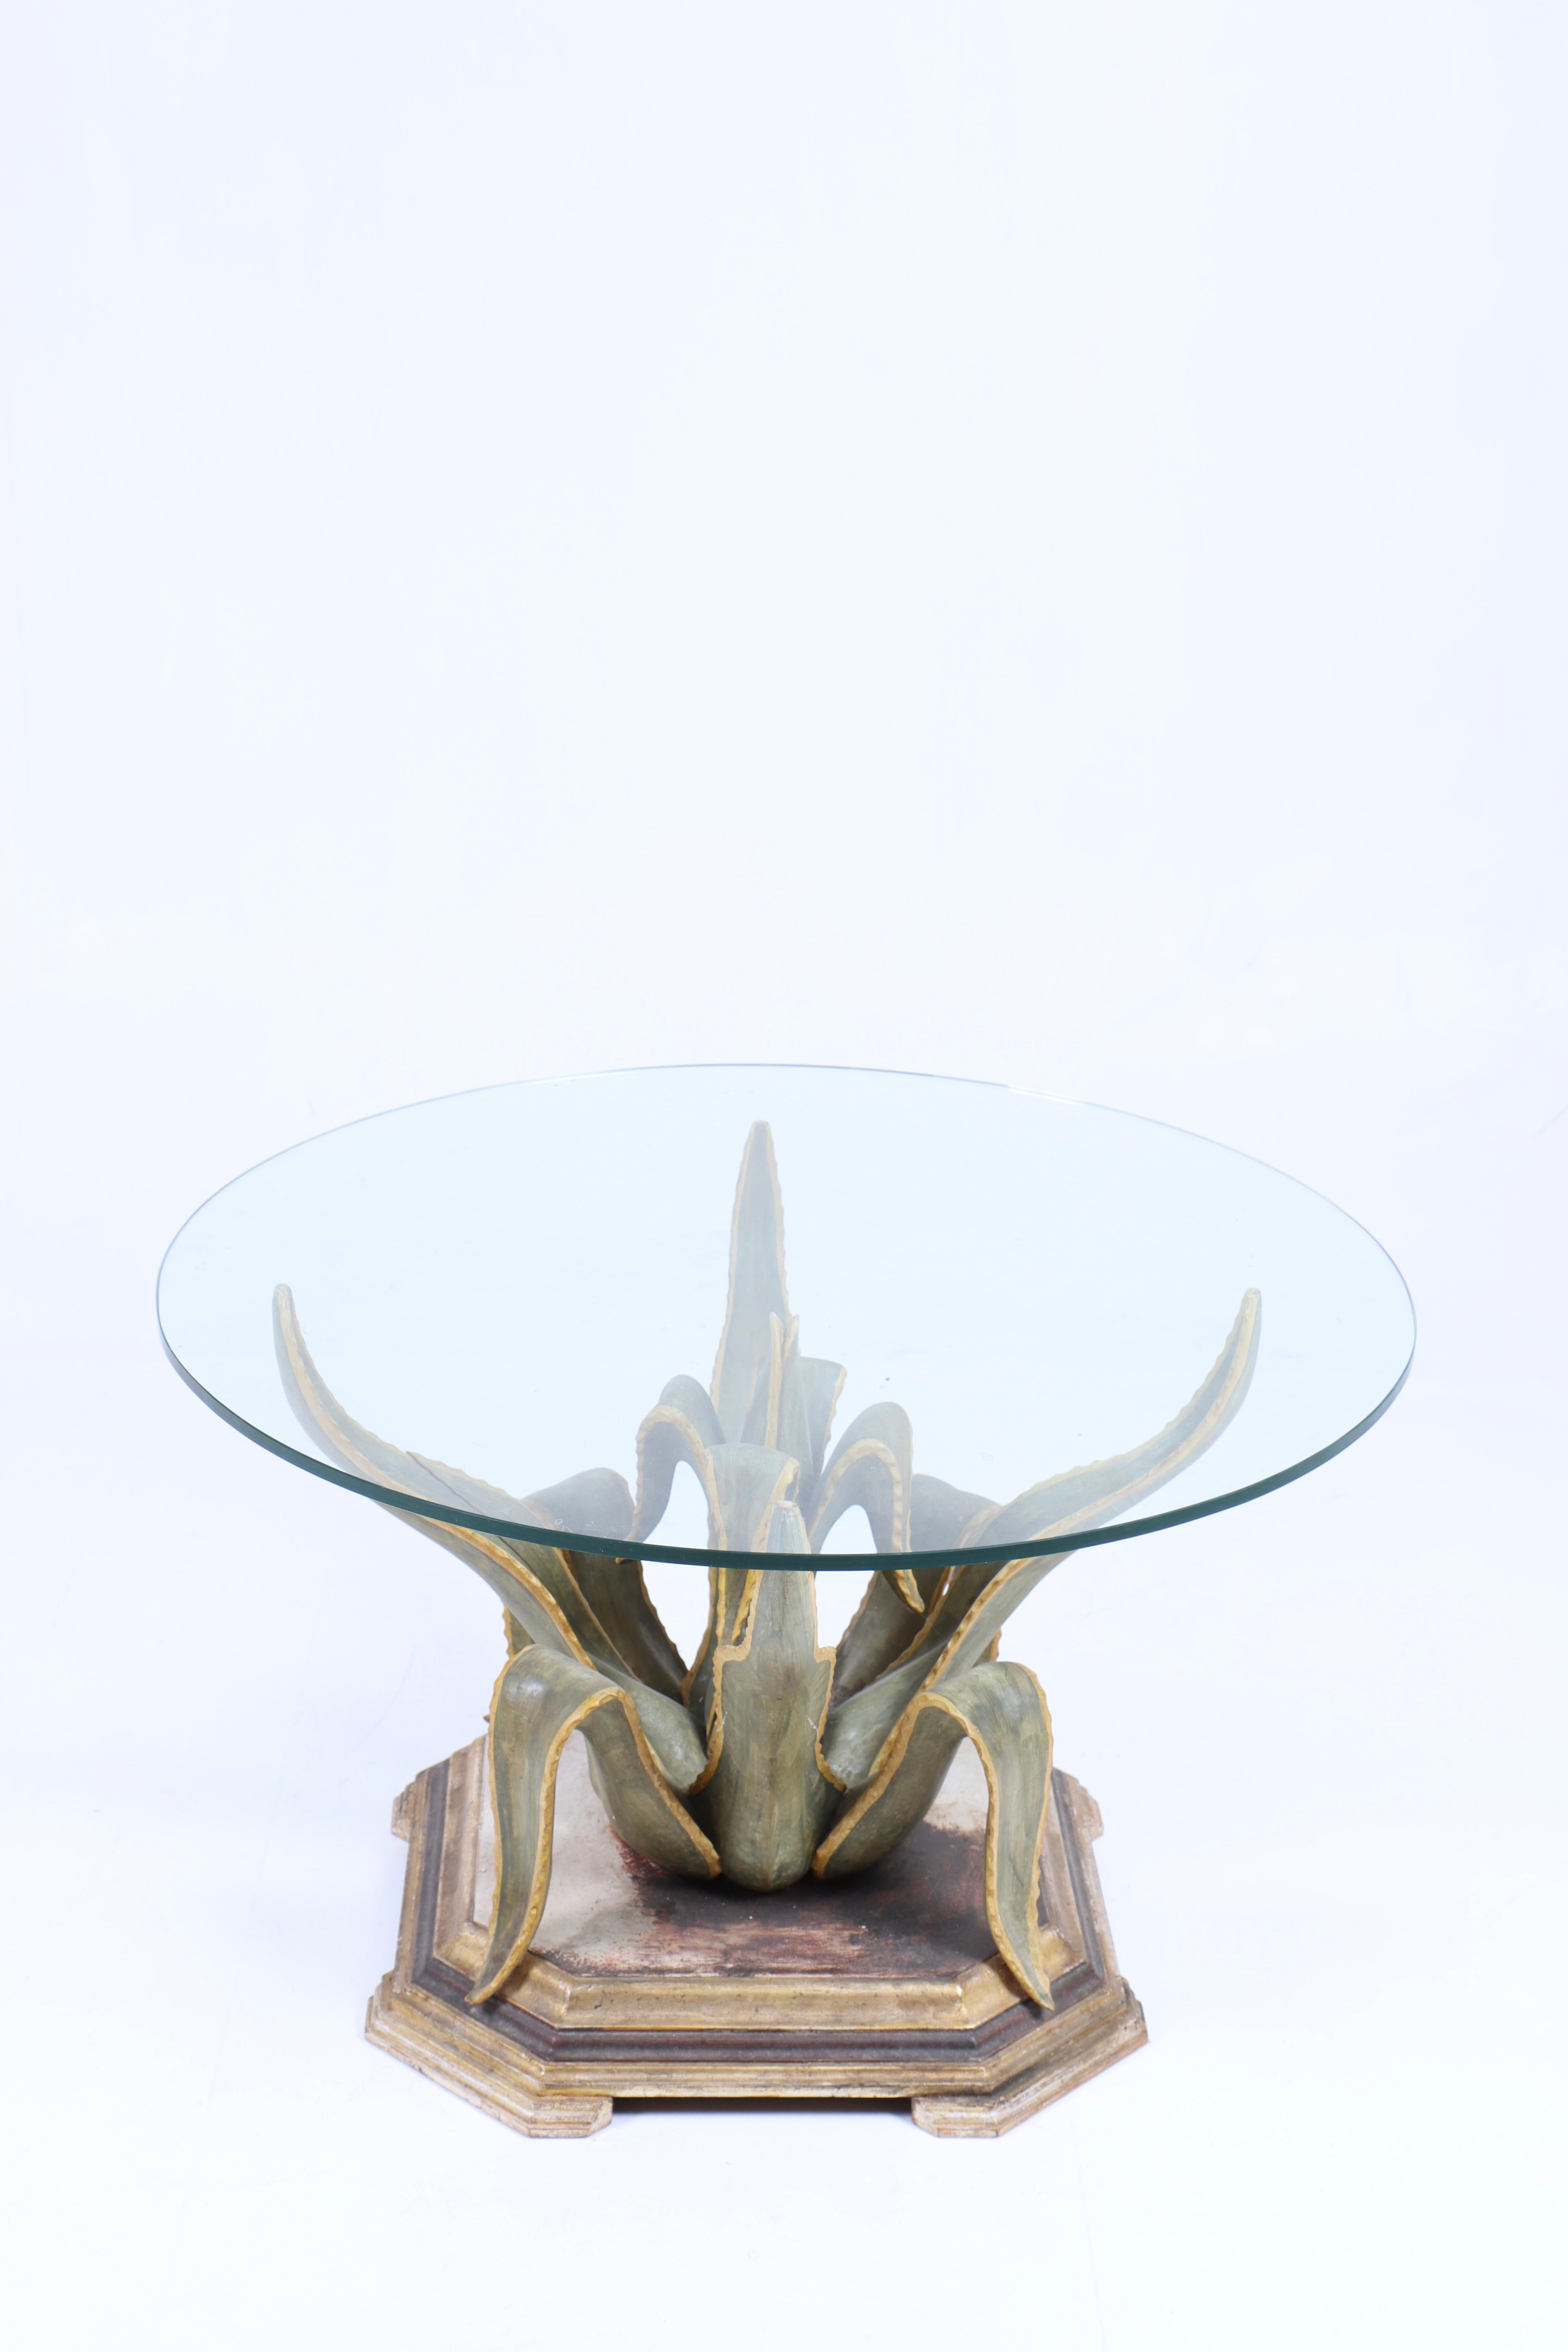 Decorative low table in plaster and glass, designed and made in Europe. Great original condition.